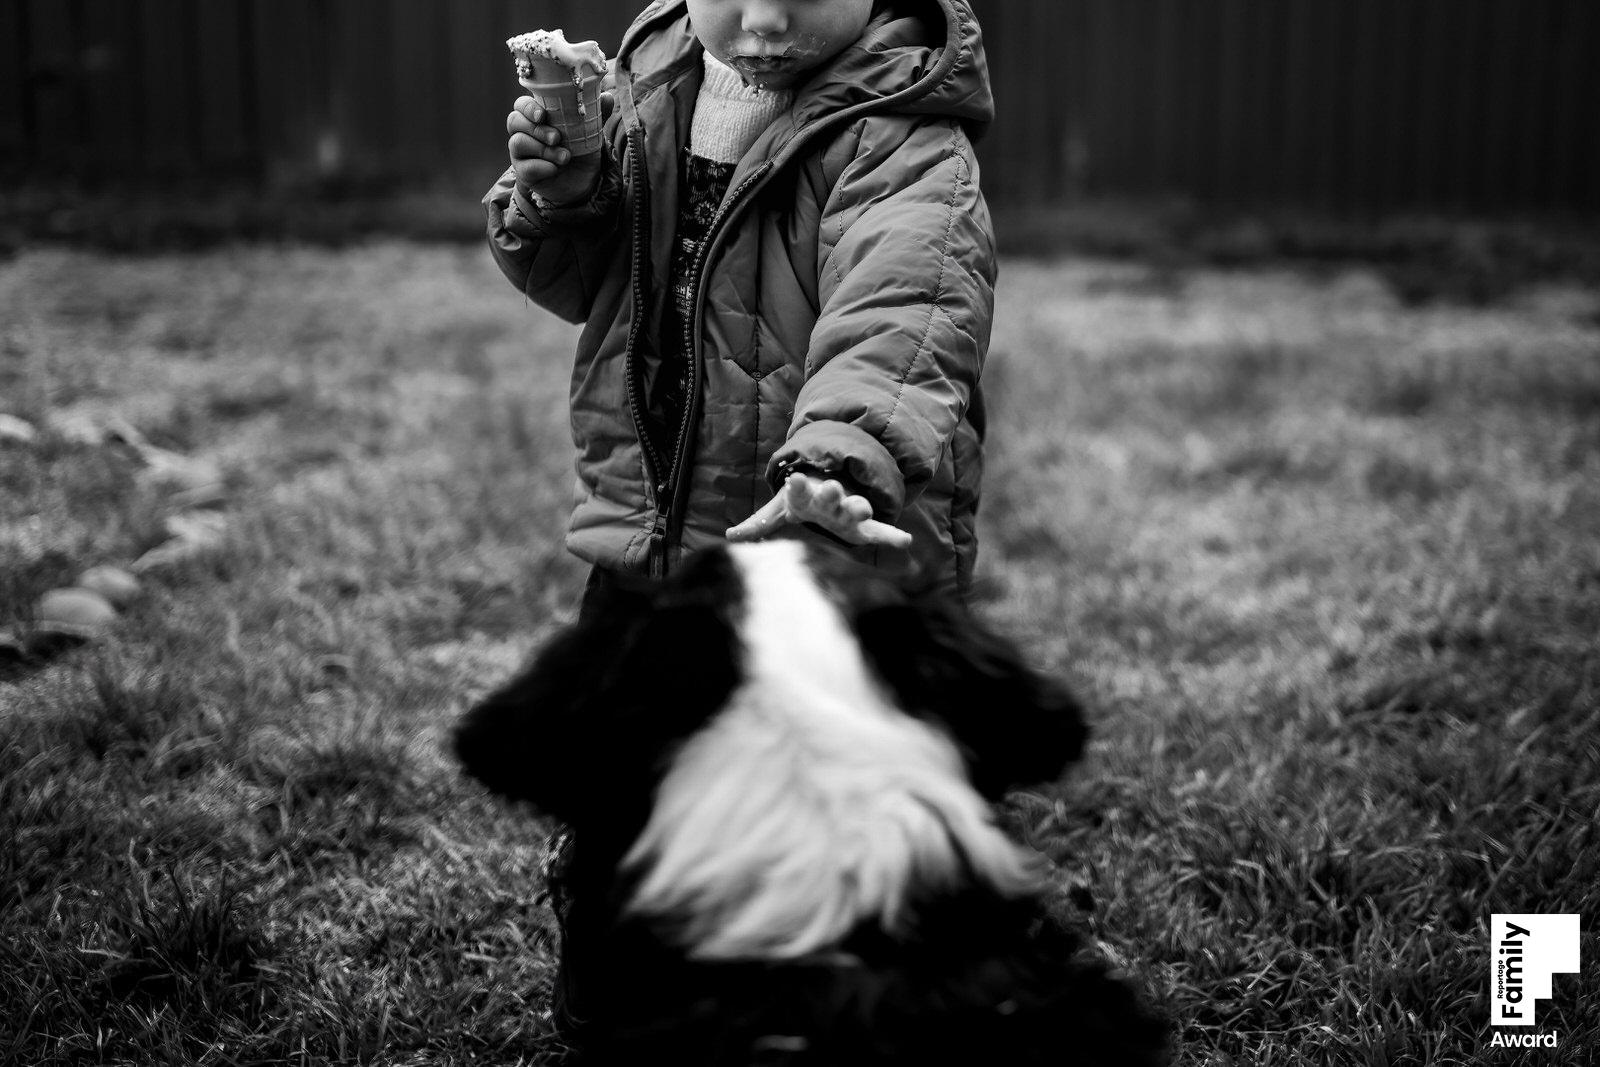 reportage family award by kate crittenden